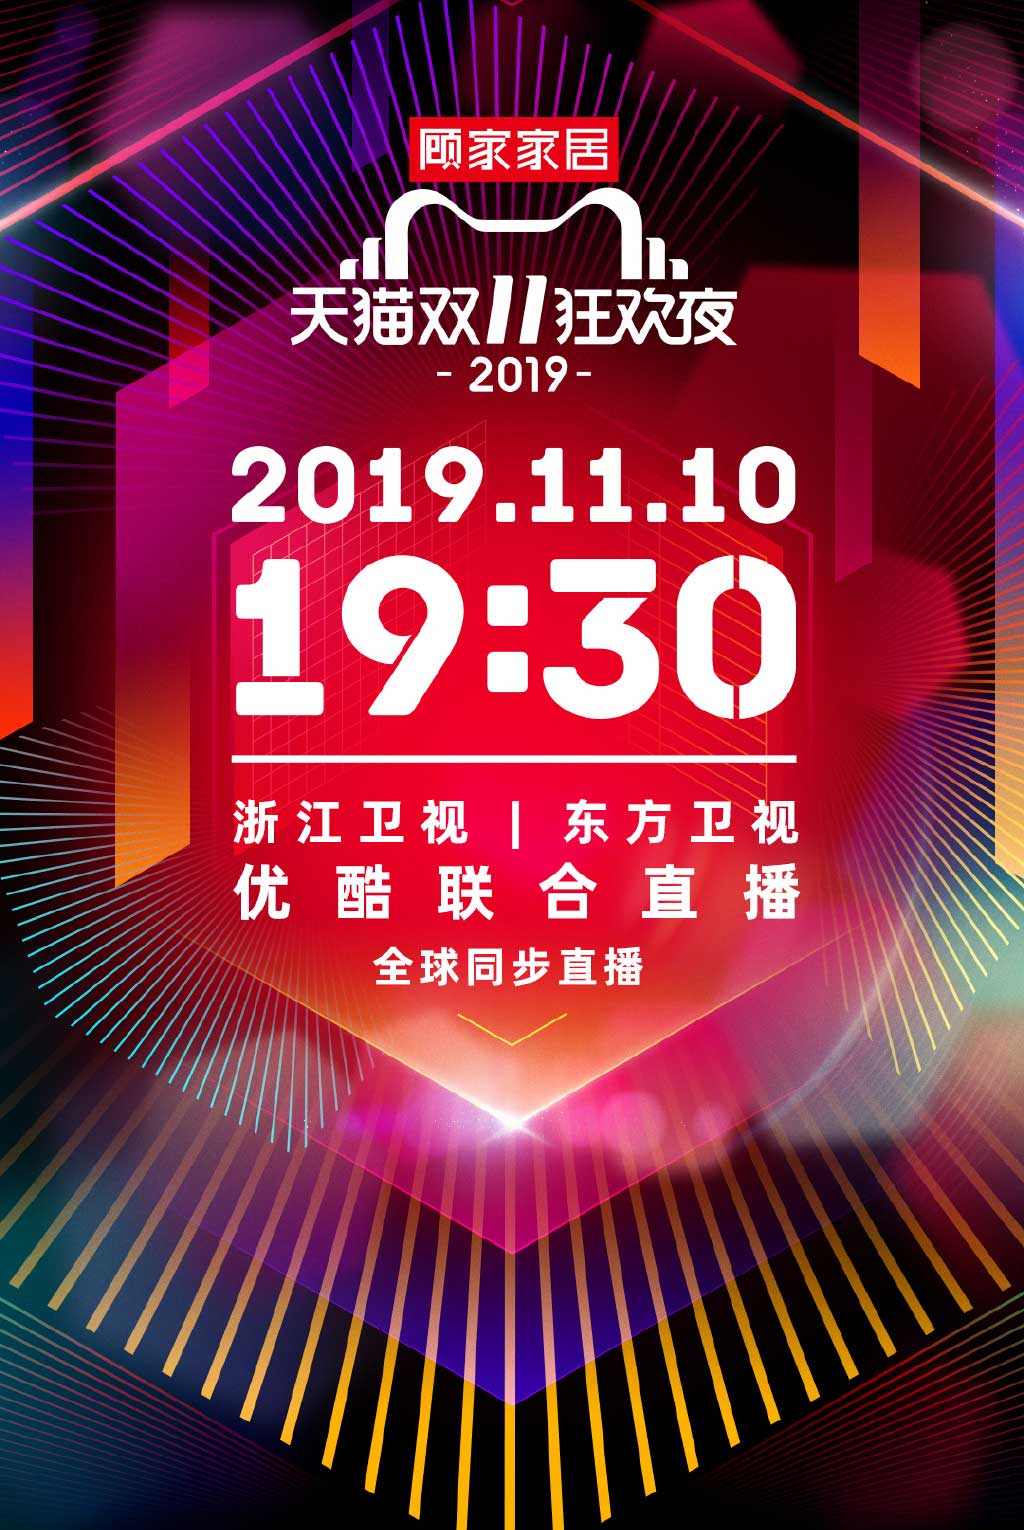 2019 Tmall Double Eleven Night Time